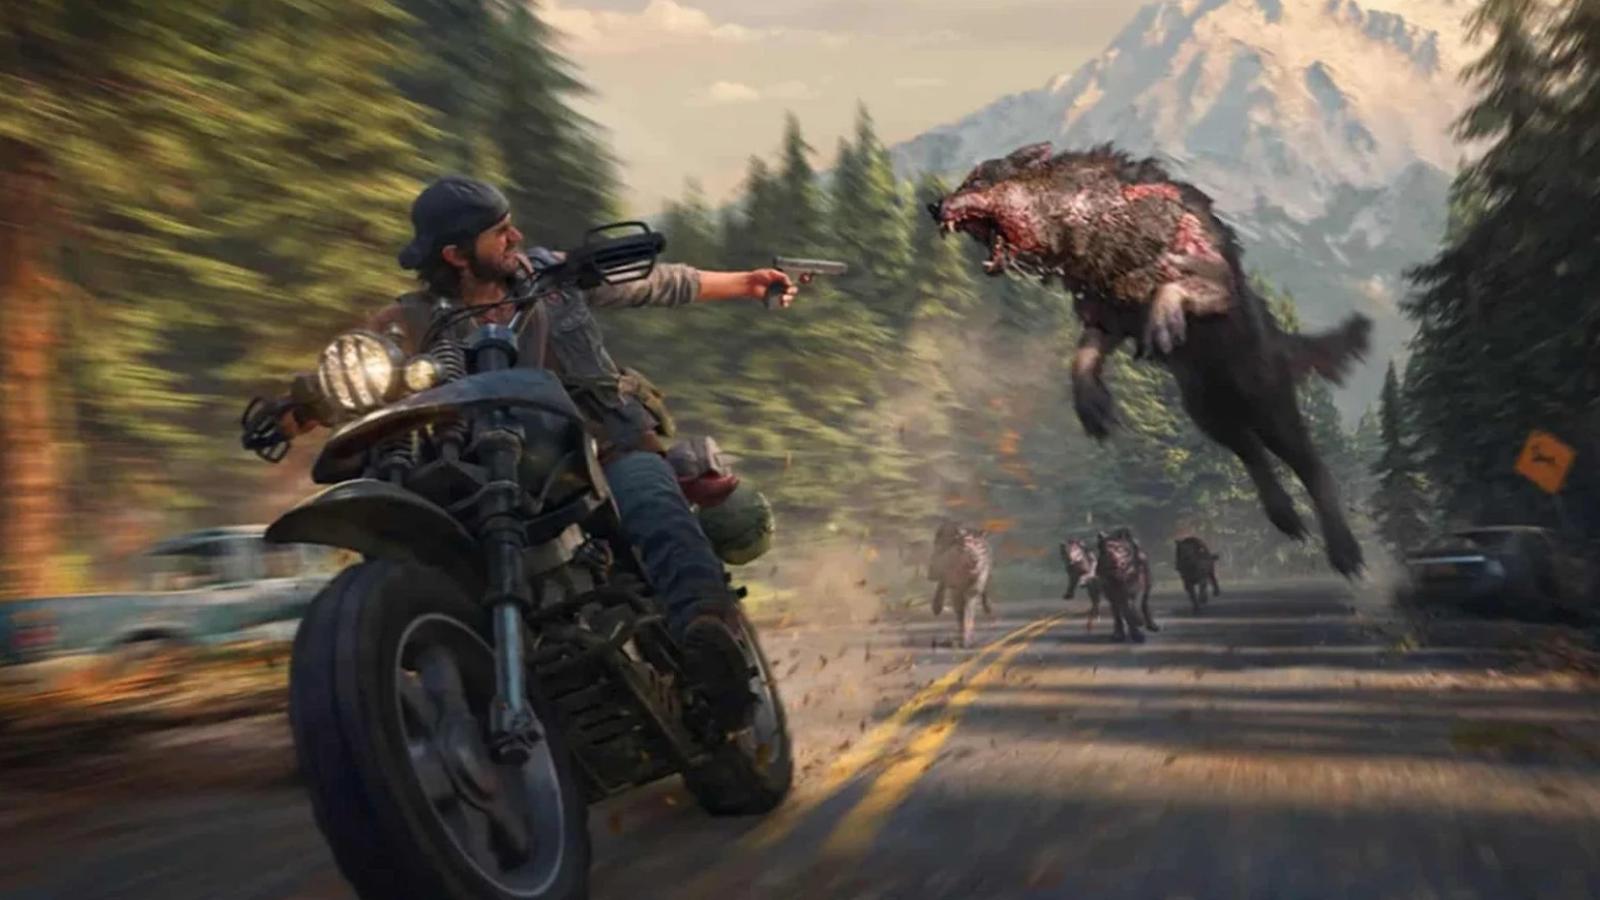 Days Gone Director Calls Out Sony 